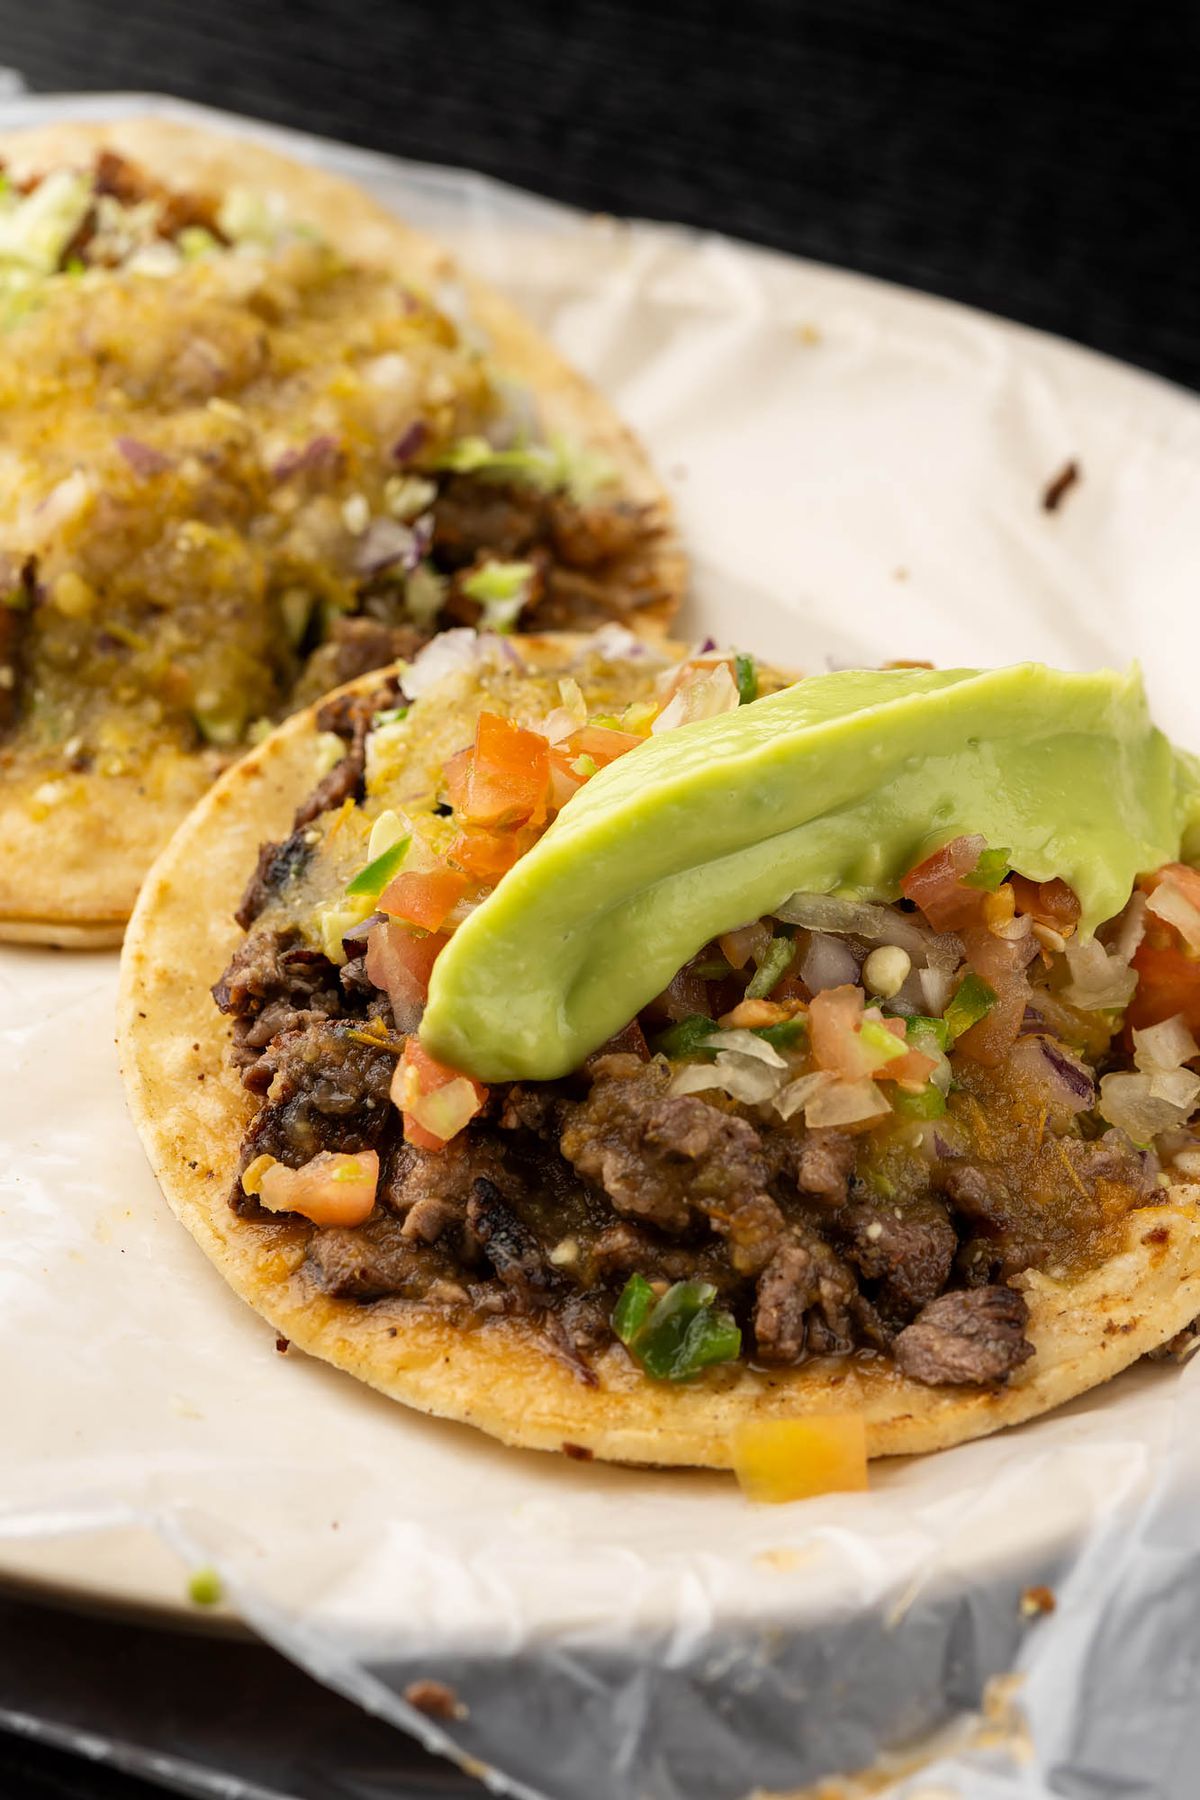 An guacamole-topped grilled beef taco.